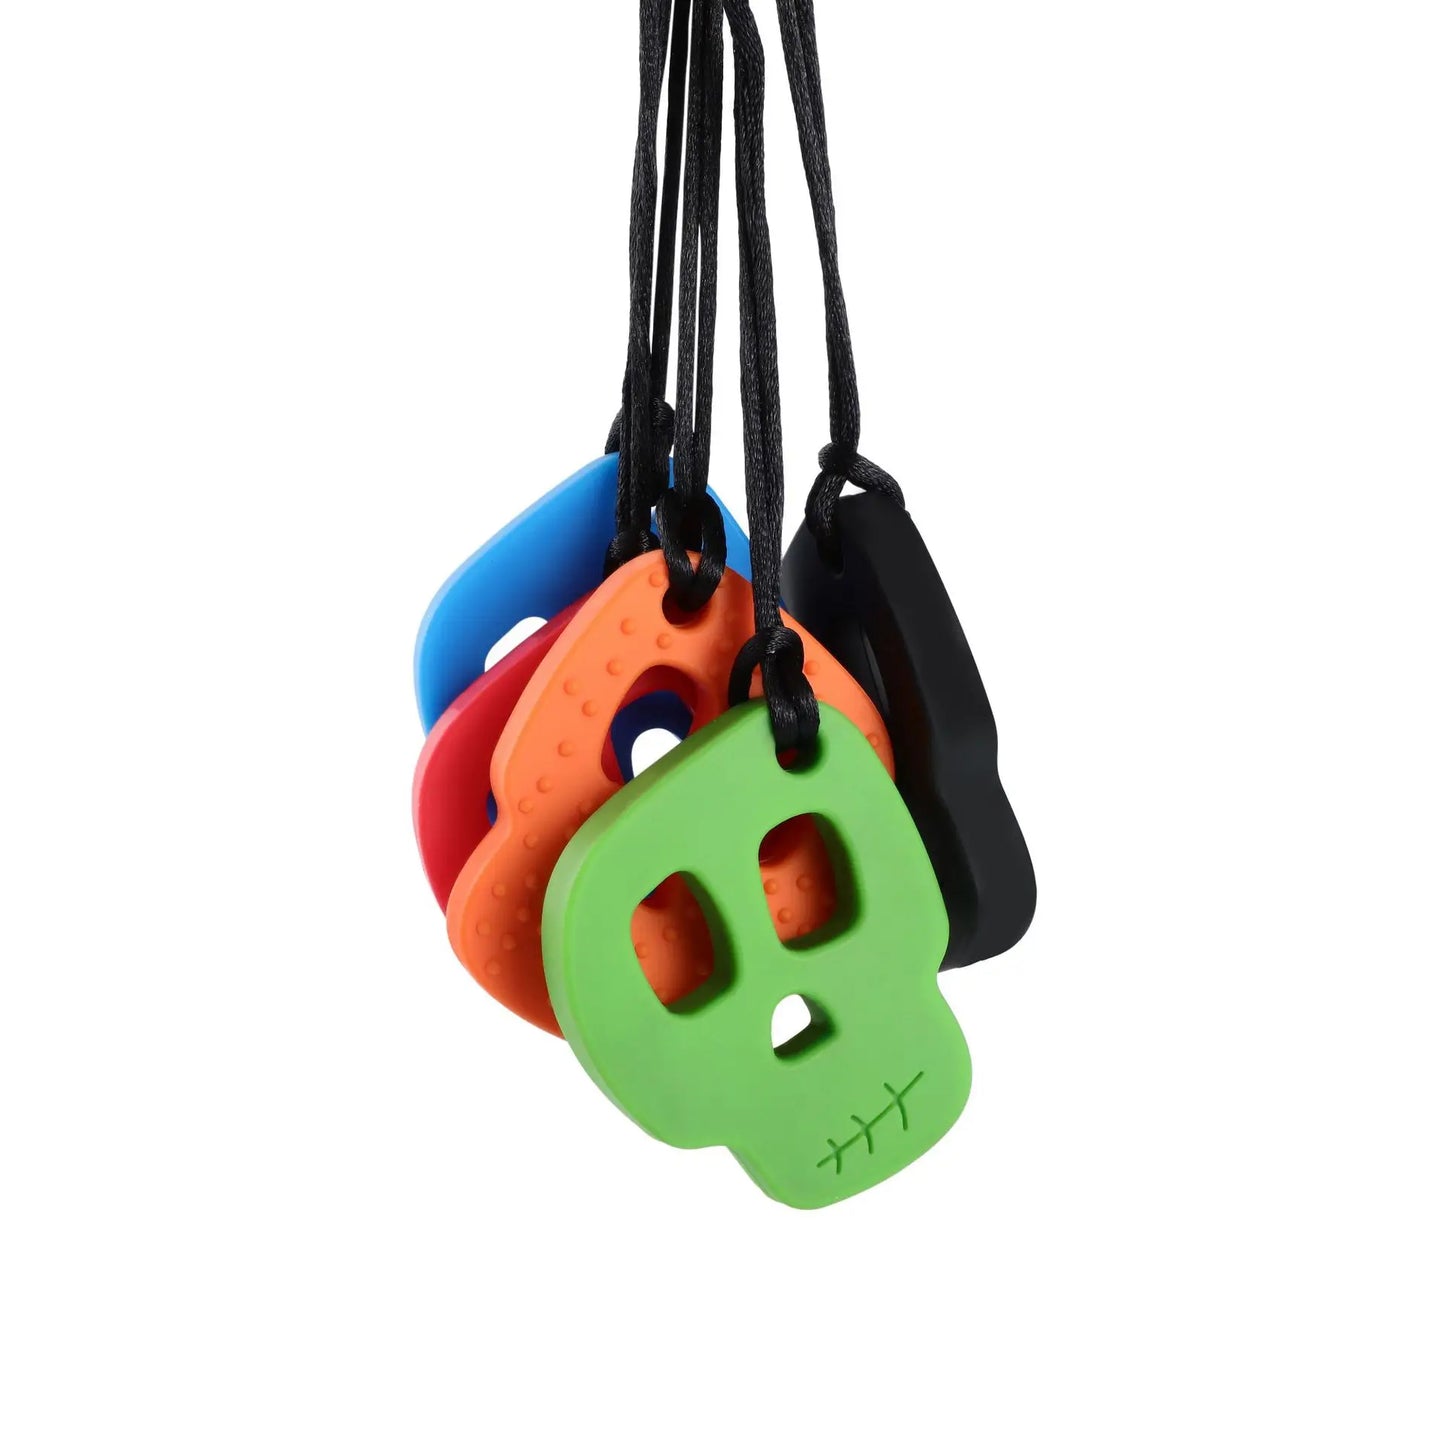 1PC Baby Teether Silicone Skull Chew Necklace Autistic Baby Silicone Teether Autism Sensory Chewy Toys Autism ADHD Teething Care